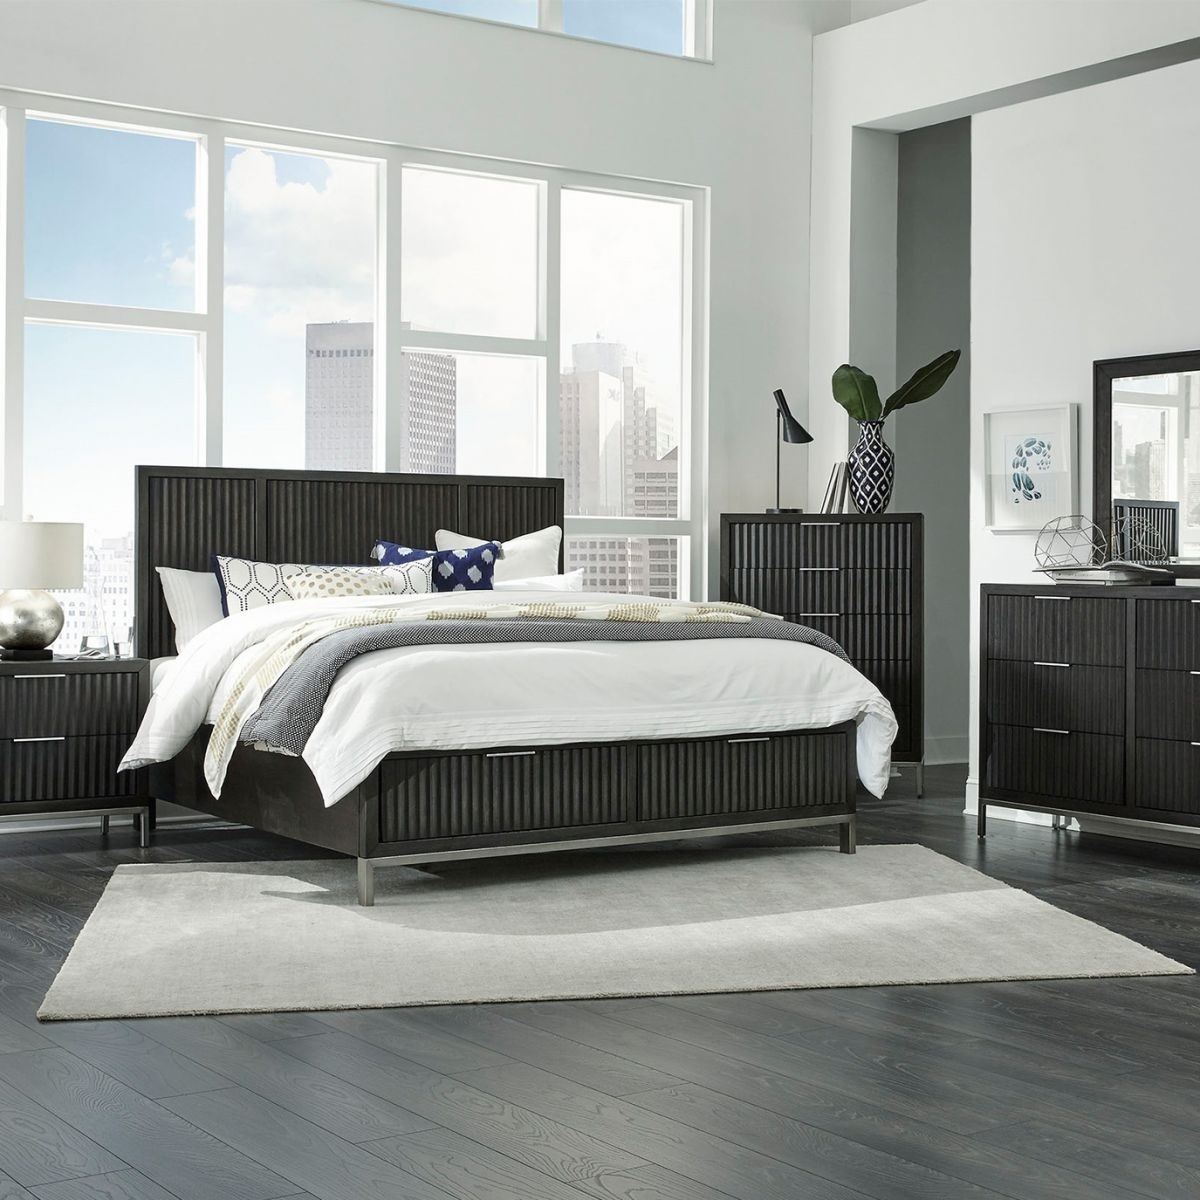 The Best Bedroom Sets For Each Family Member Badcock More throughout size 1200 X 1200